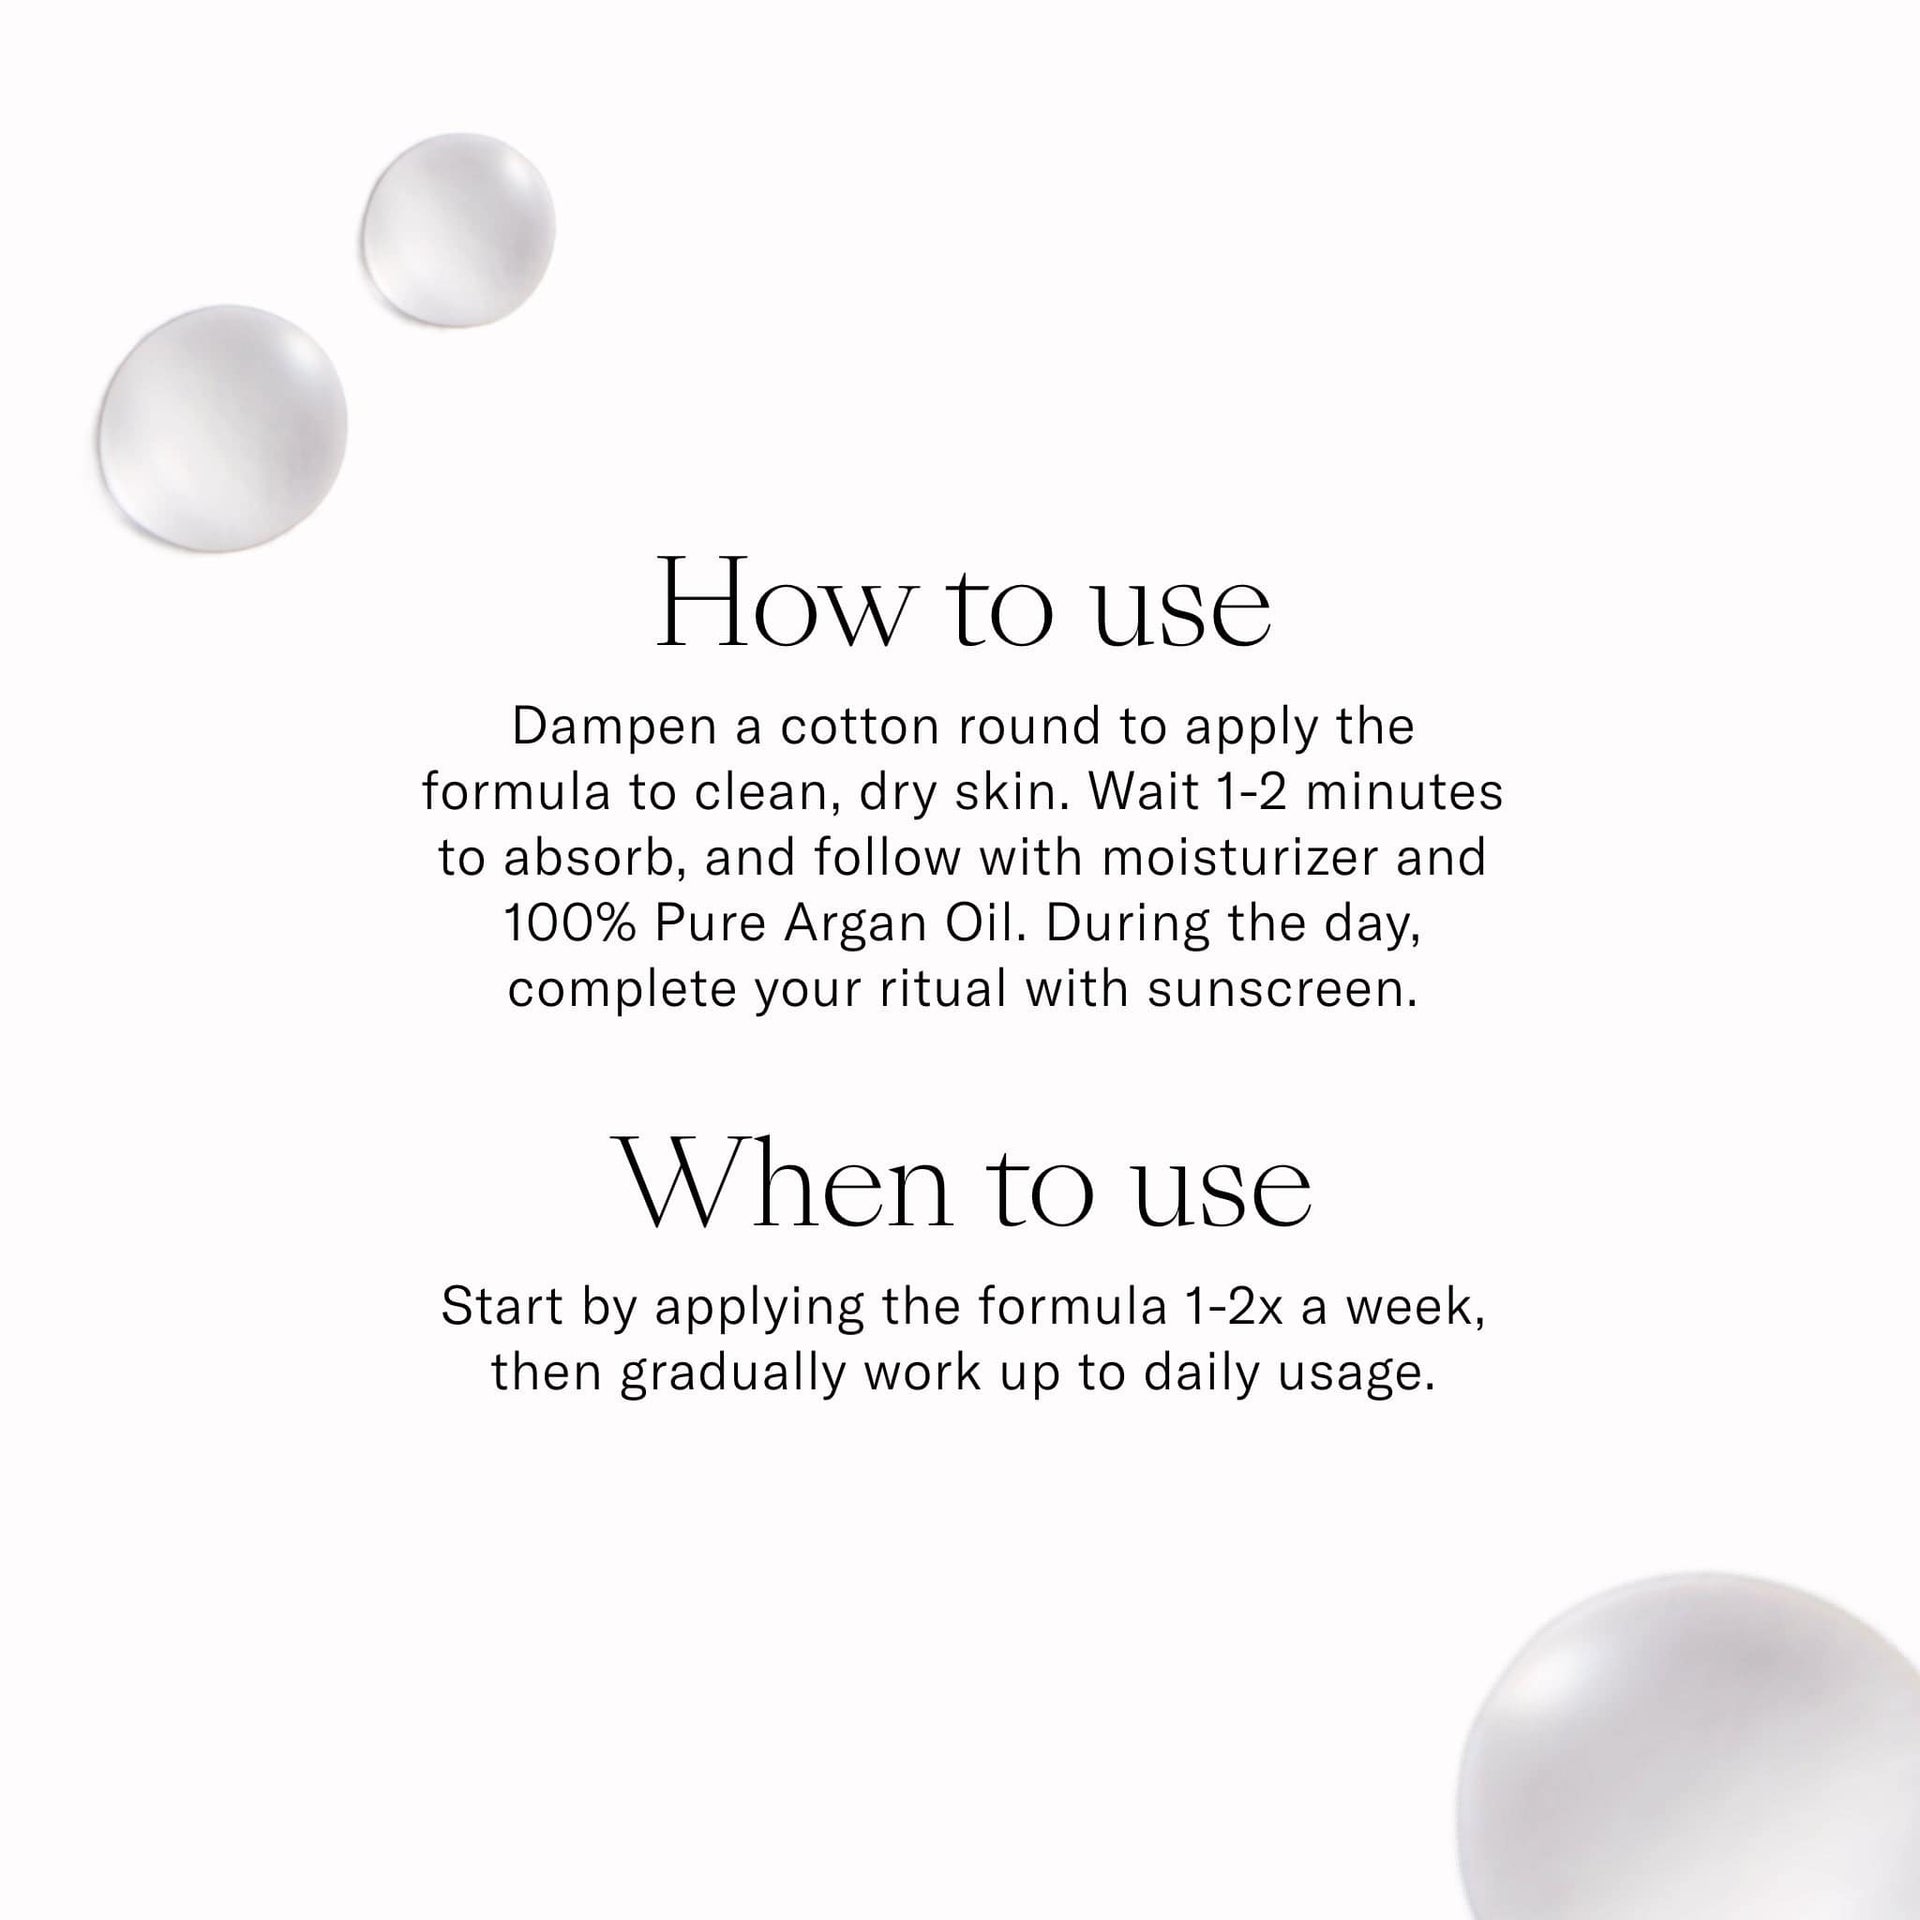 How to Use. Dampen a cotton round to apply the formula to clean dry skin. Wait 1-2 minutes to absorb and follow with moisturizer. Apply 1-2x a week. 